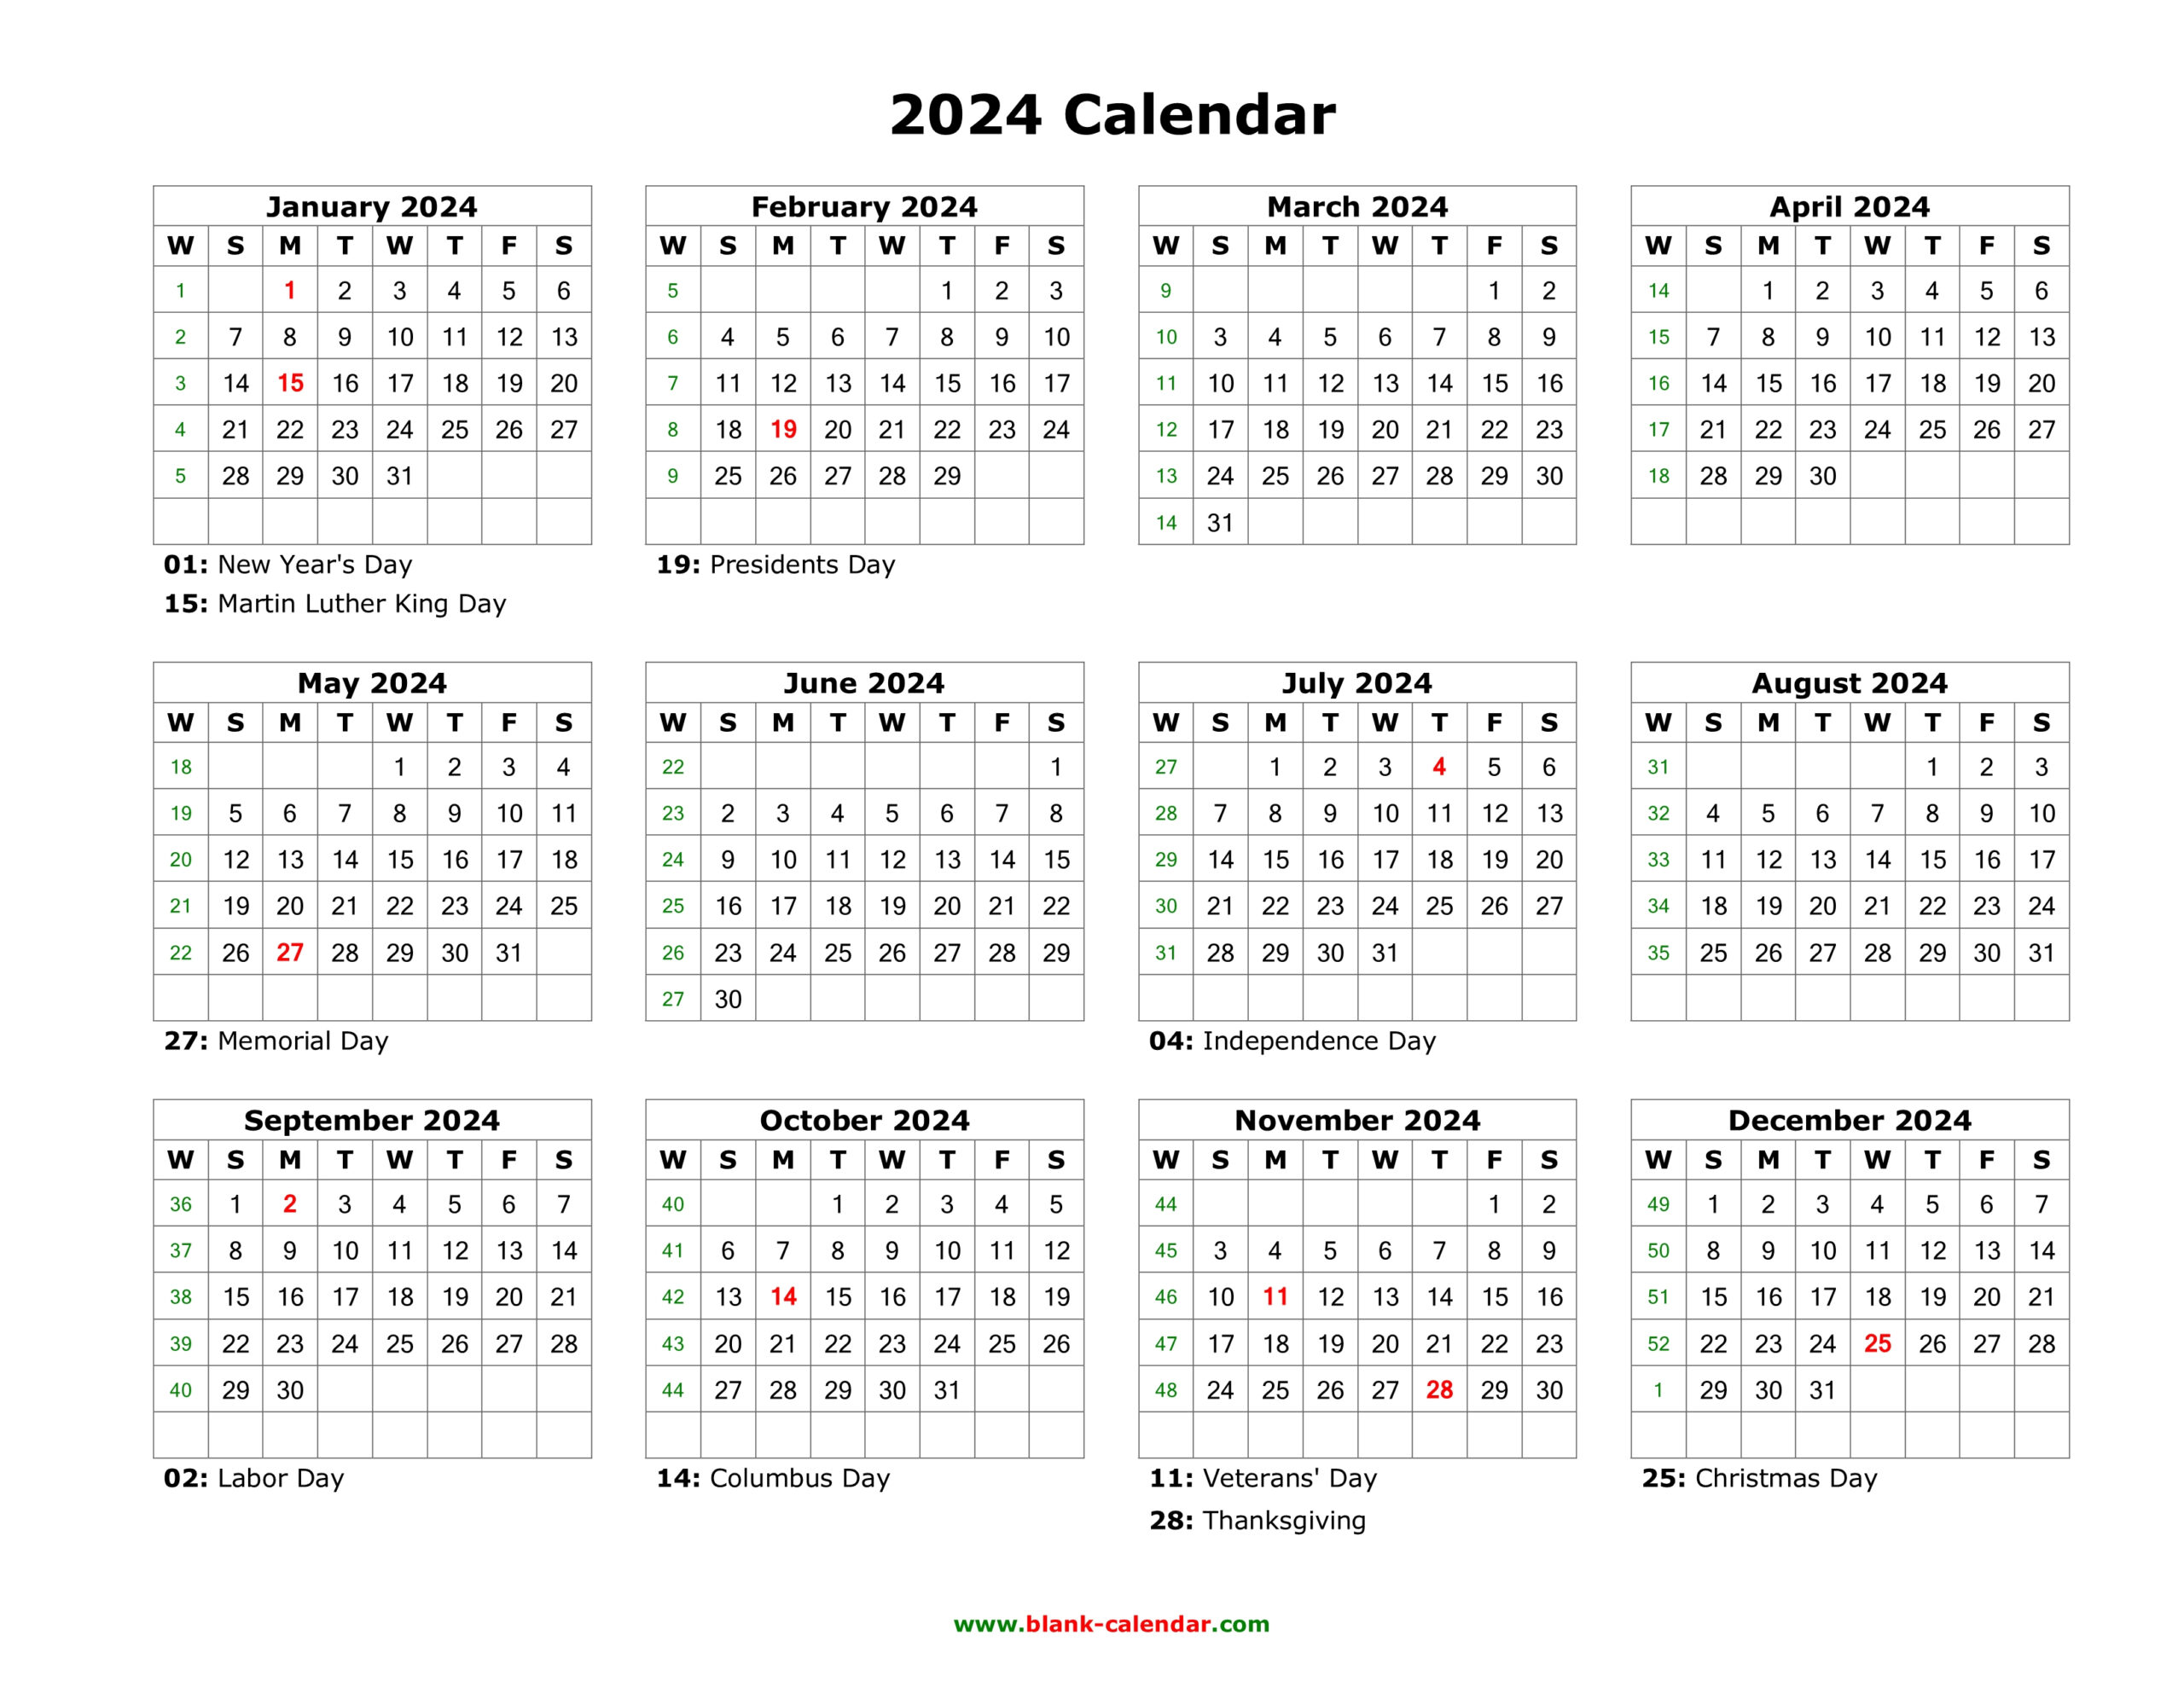 Download Blank Calendar 2024 With Us Holidays (12 Months On One for Free Printable Calendar 2024 12 Months